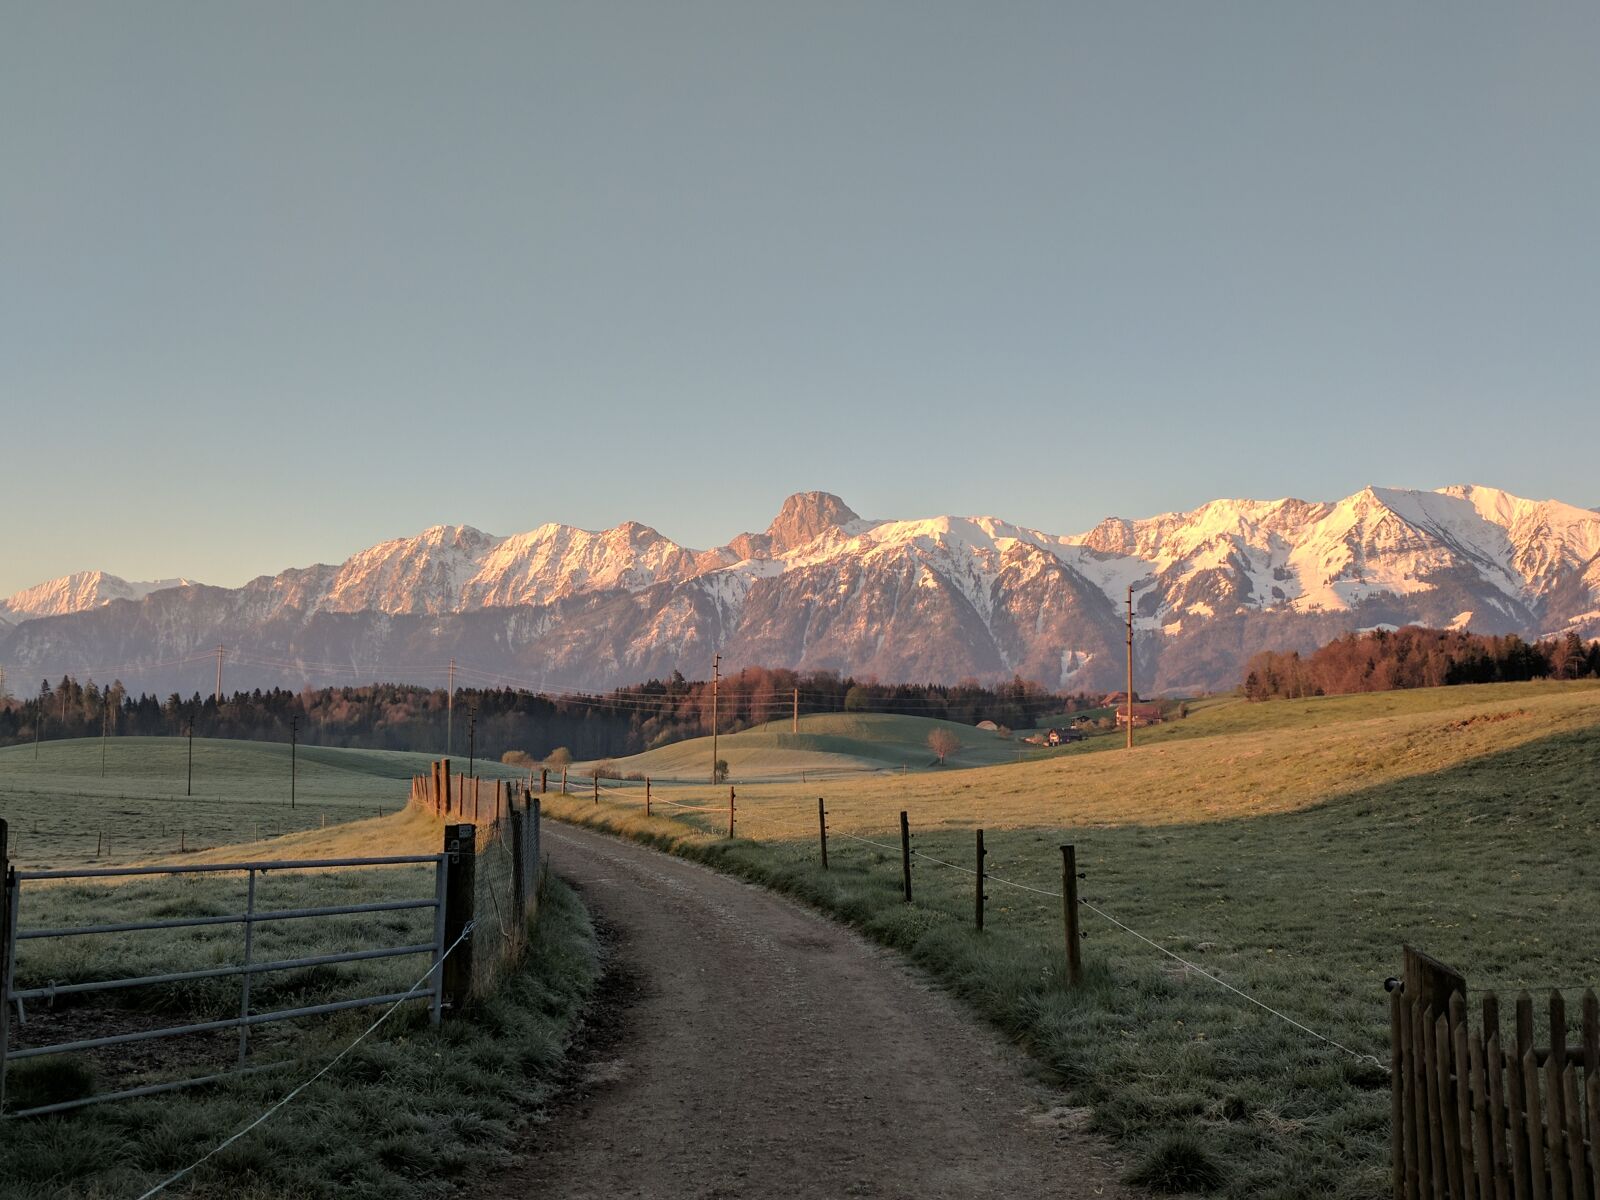 Google Pixel XL sample photo. Alps, country, road, early photography